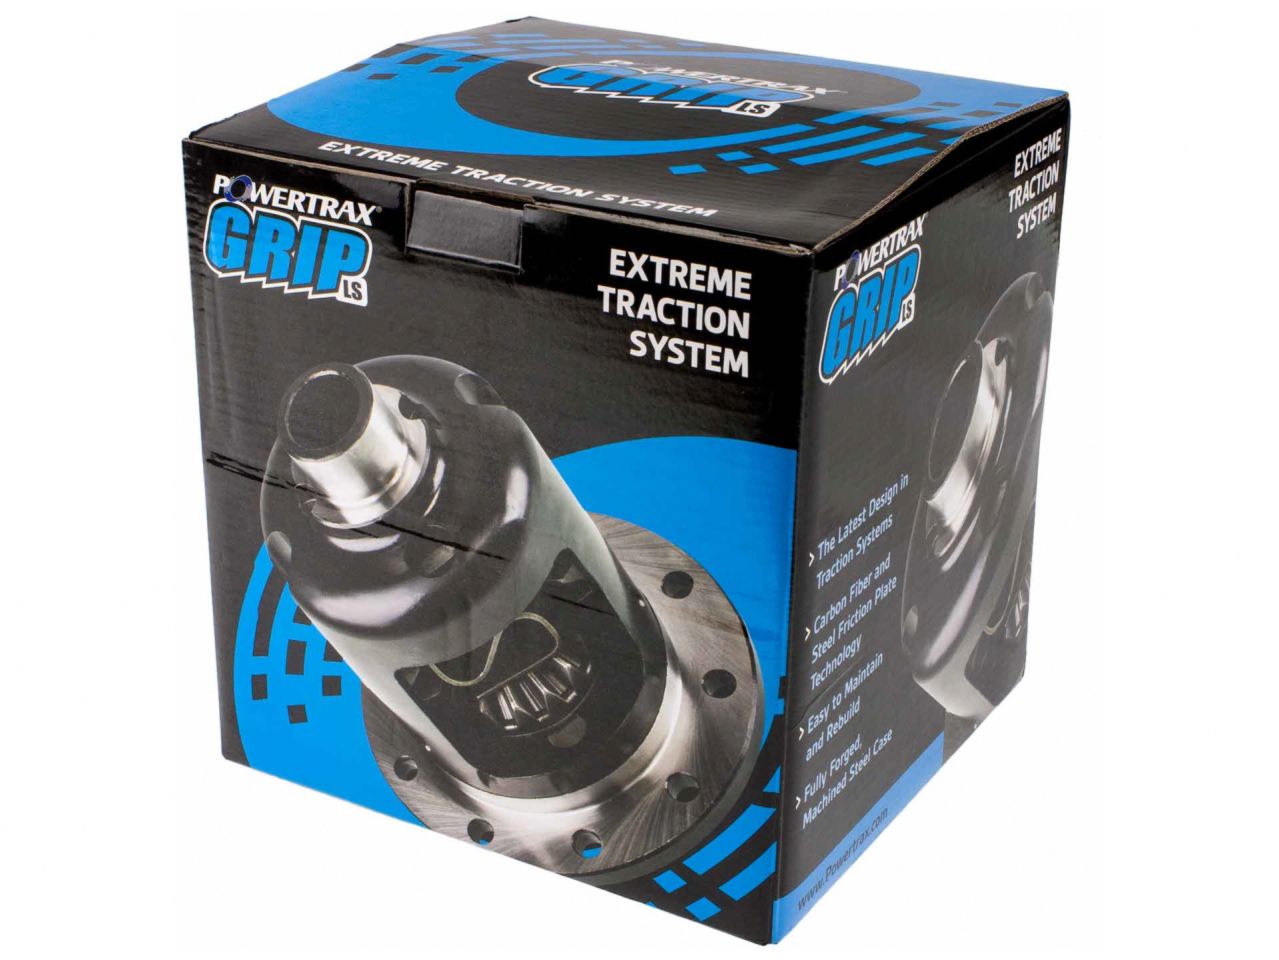 Powertrax Grip LS Traction System